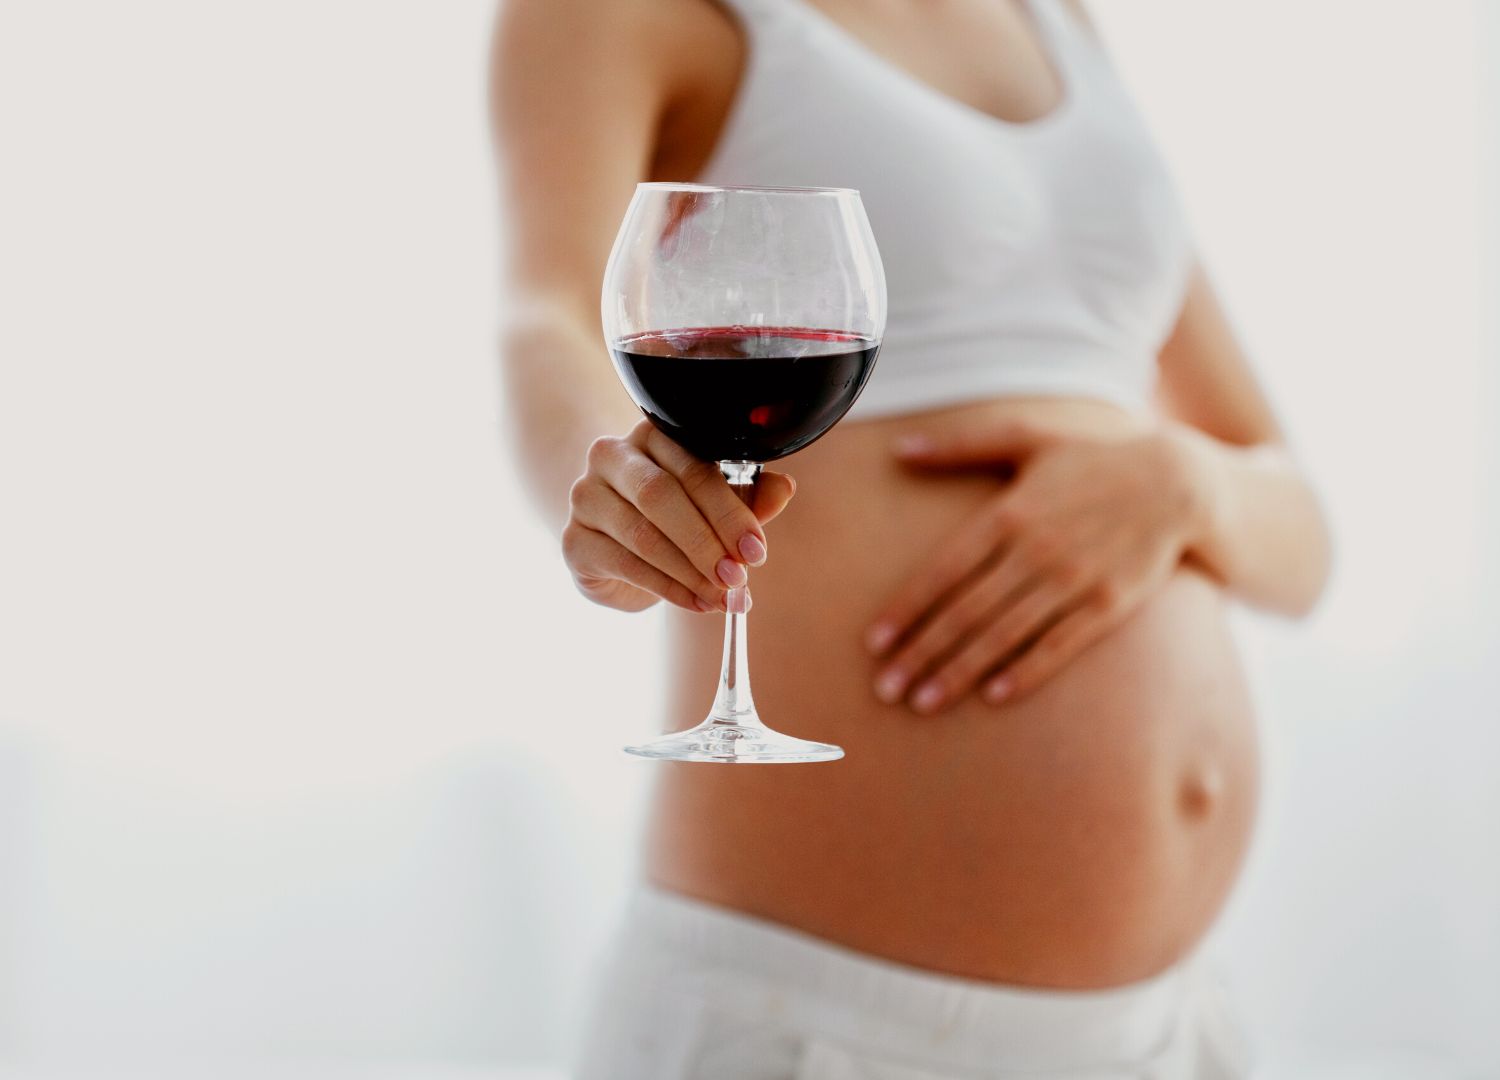 Fetal-Alcohol Syndrome: Effects of Alcohol on the unborn